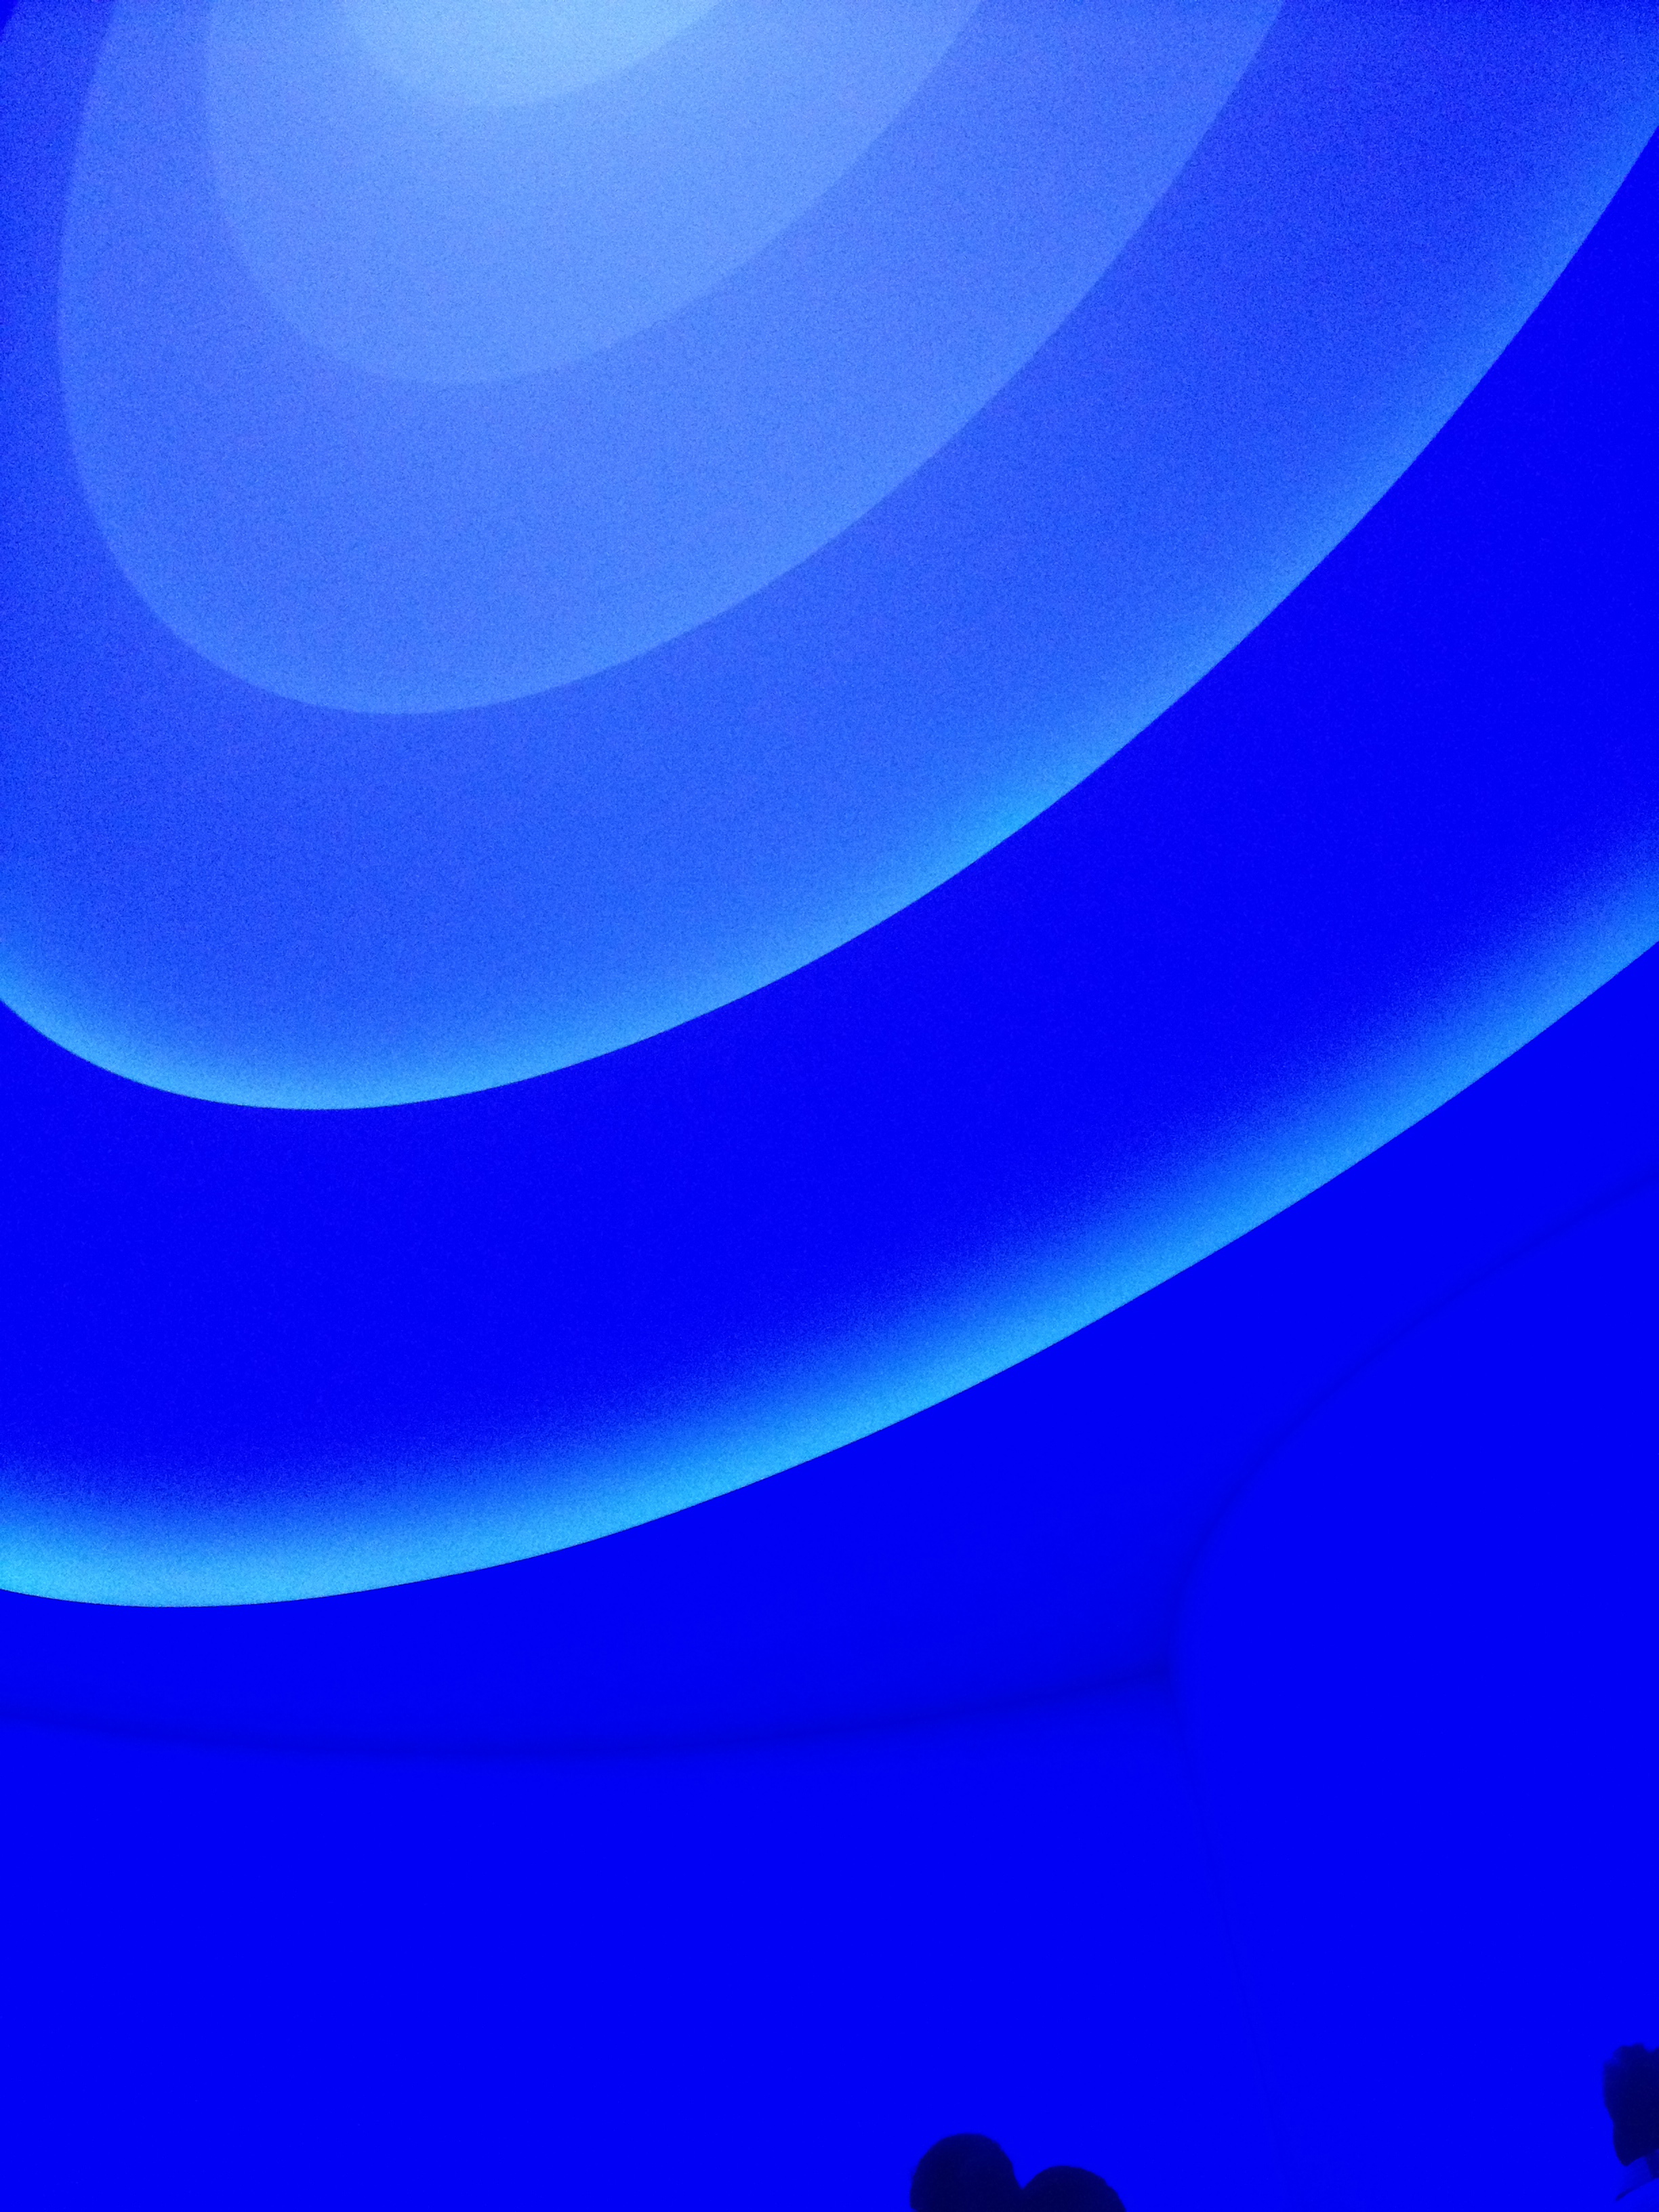 30000 James Turrell Pictures  Download Free Images on Unsplash